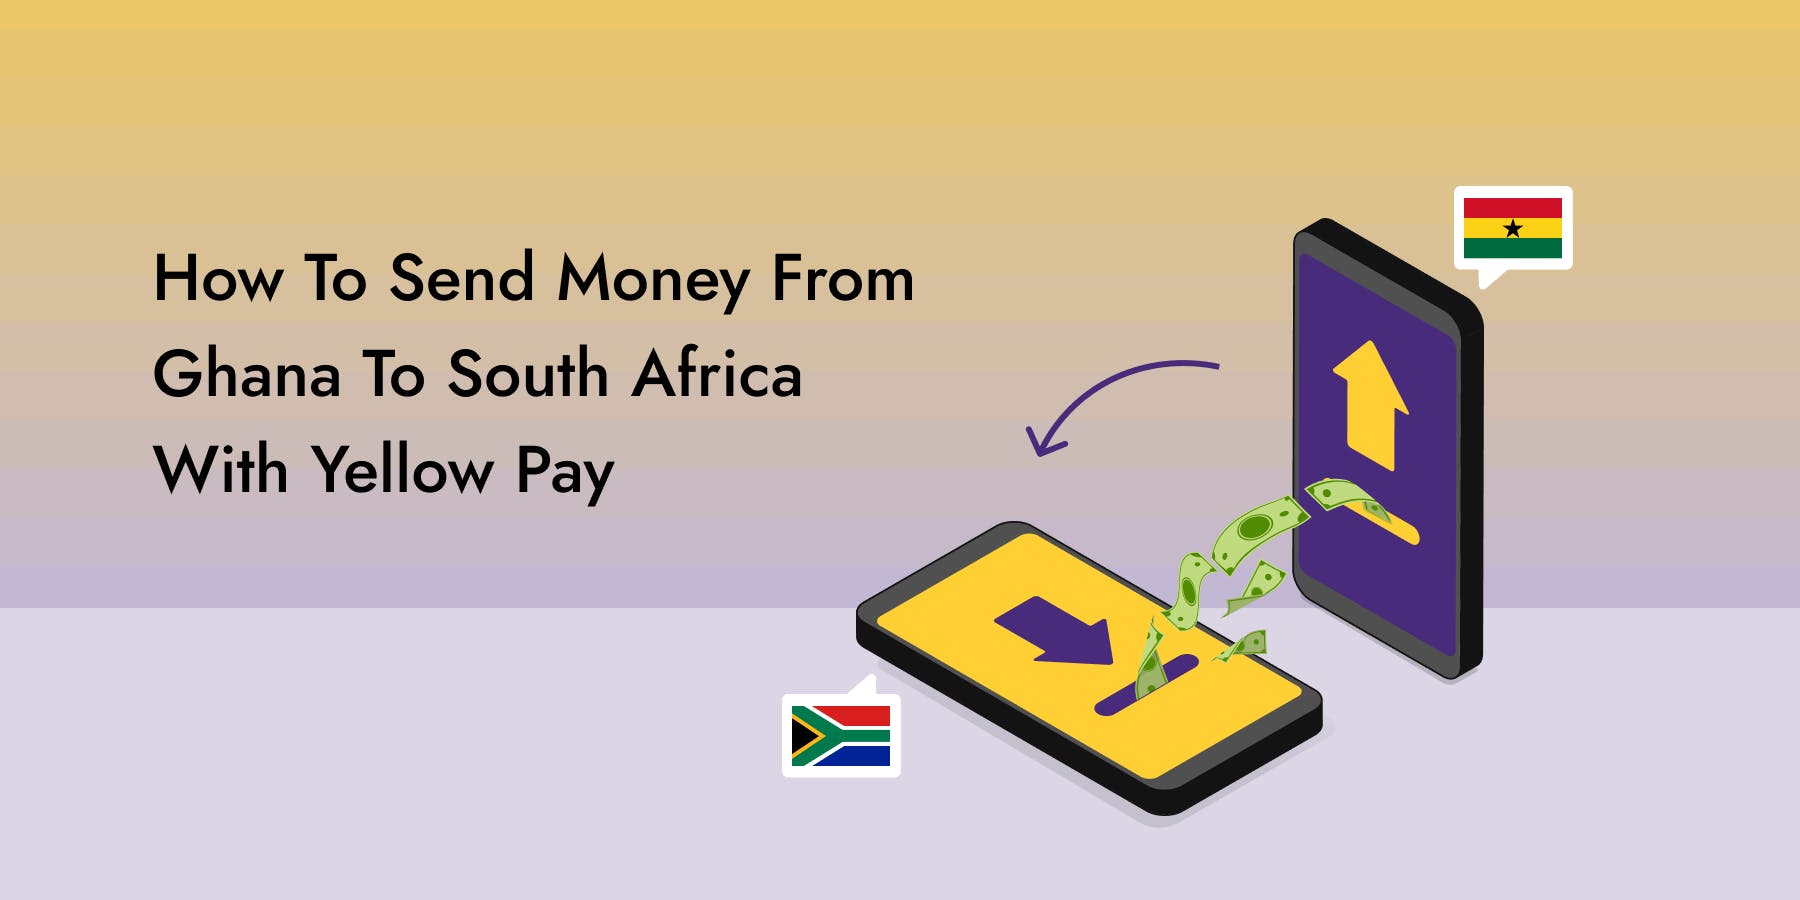 How To Send Money From Ghana To South Africa With Yellow Pay